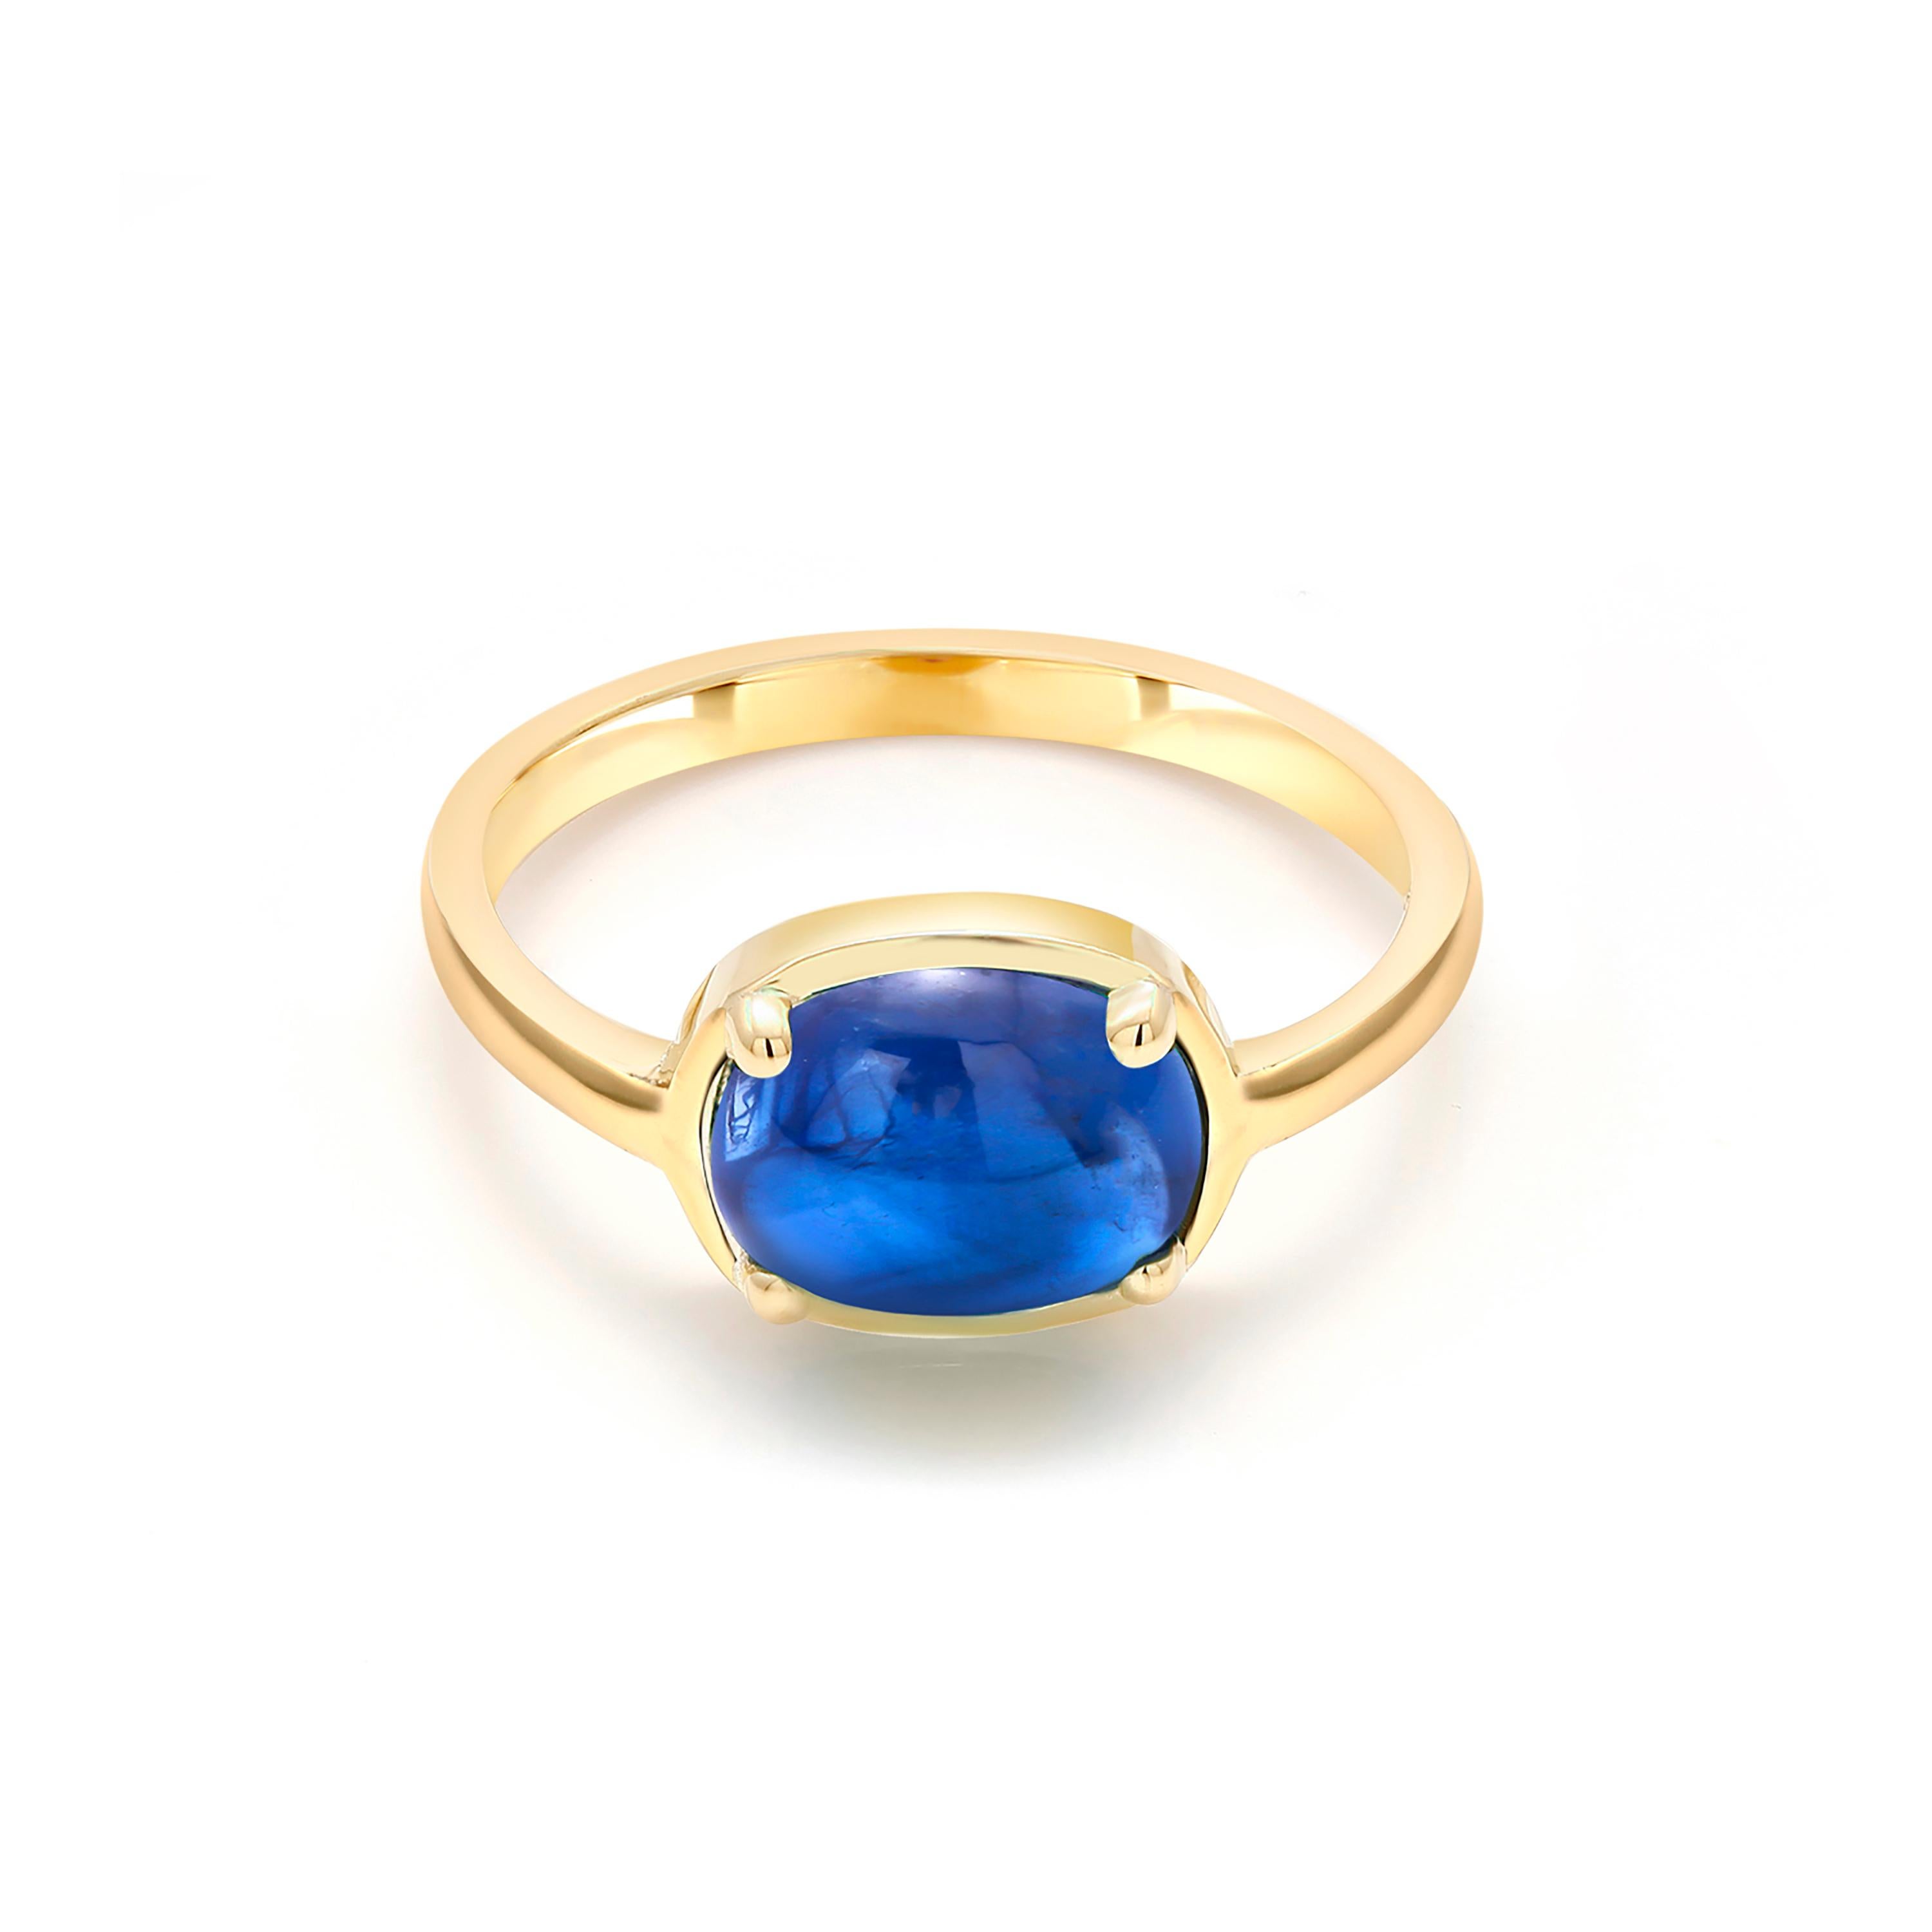 Contemporary Ceylon Cabochon Sapphire Weighing 4.20 Carat Yellow Gold Cocktail Ring